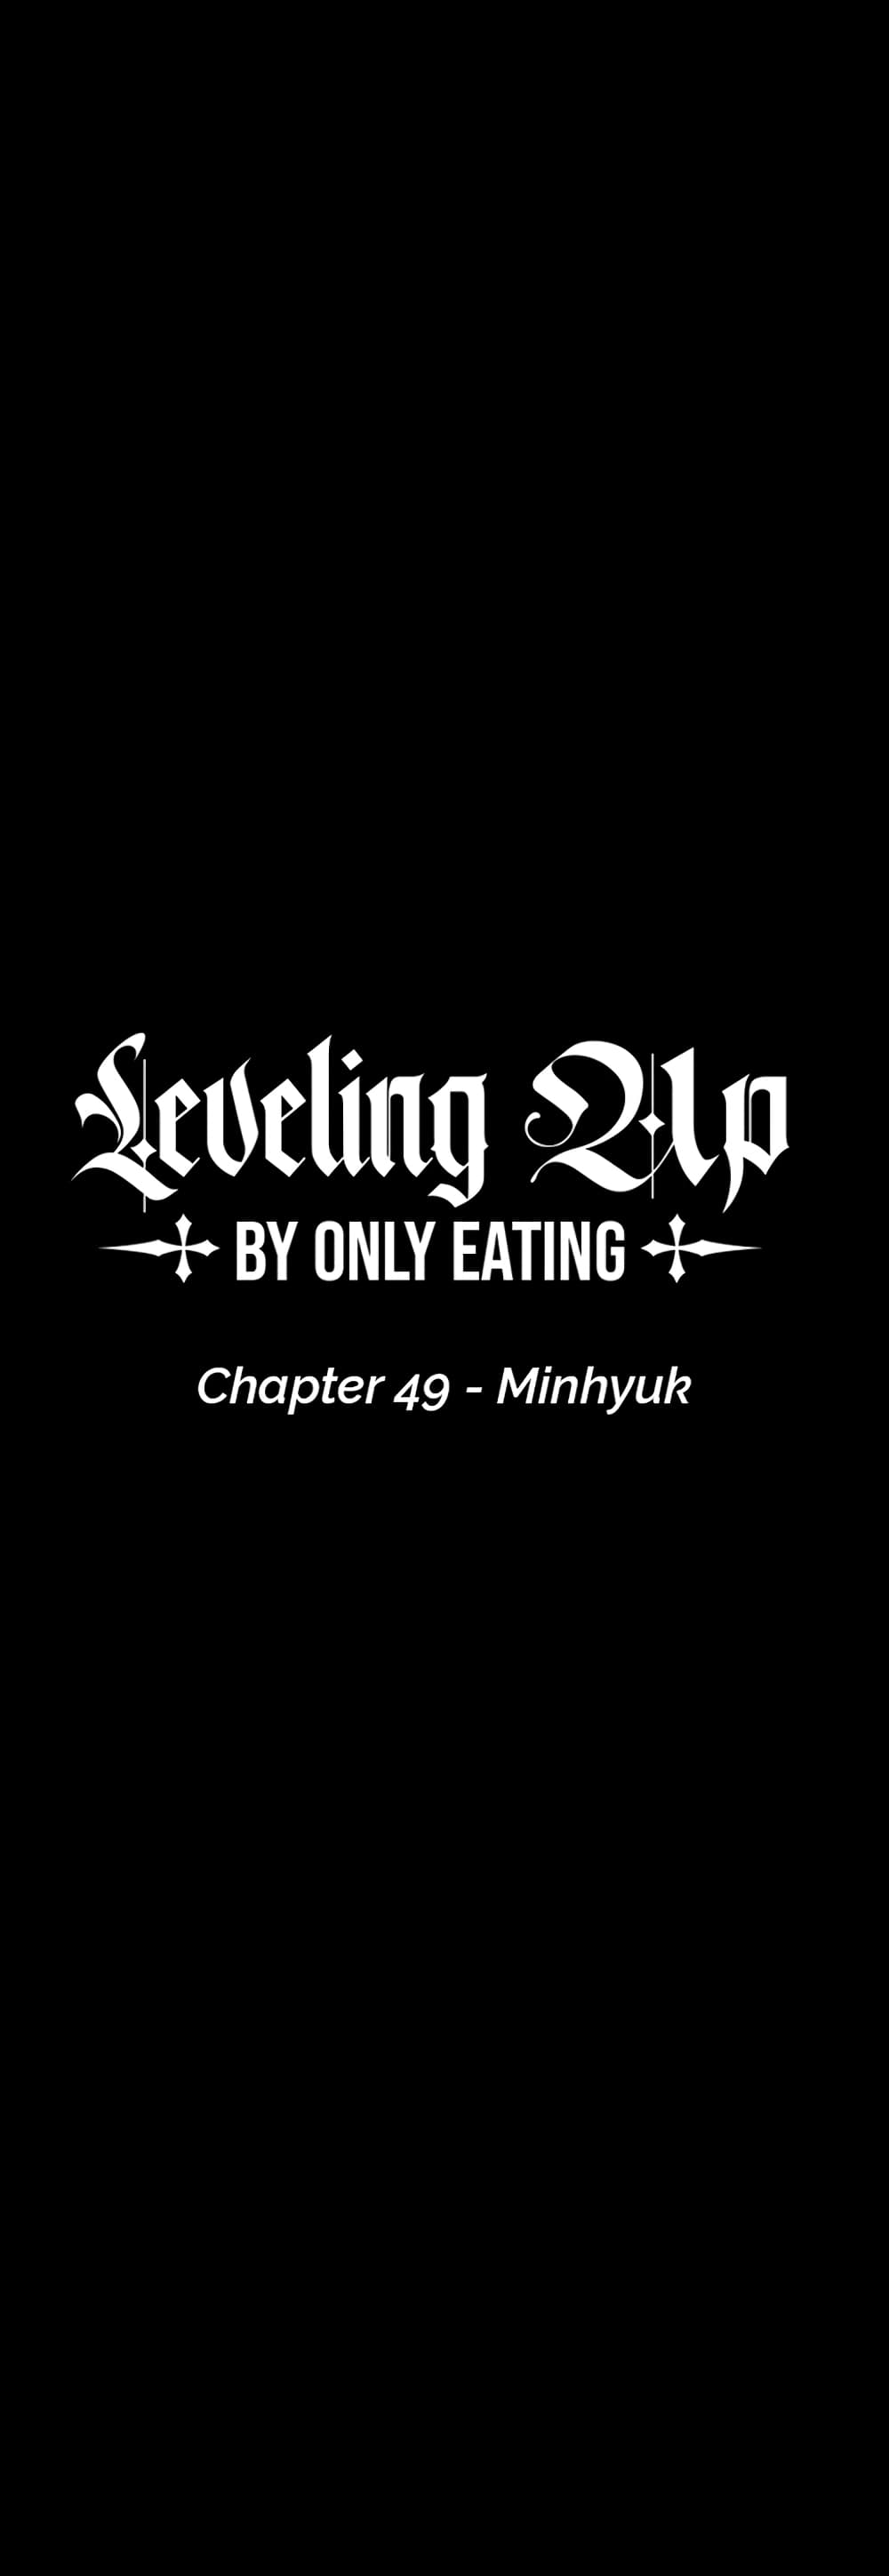 Leveling Up, By Only Eating! 49-49